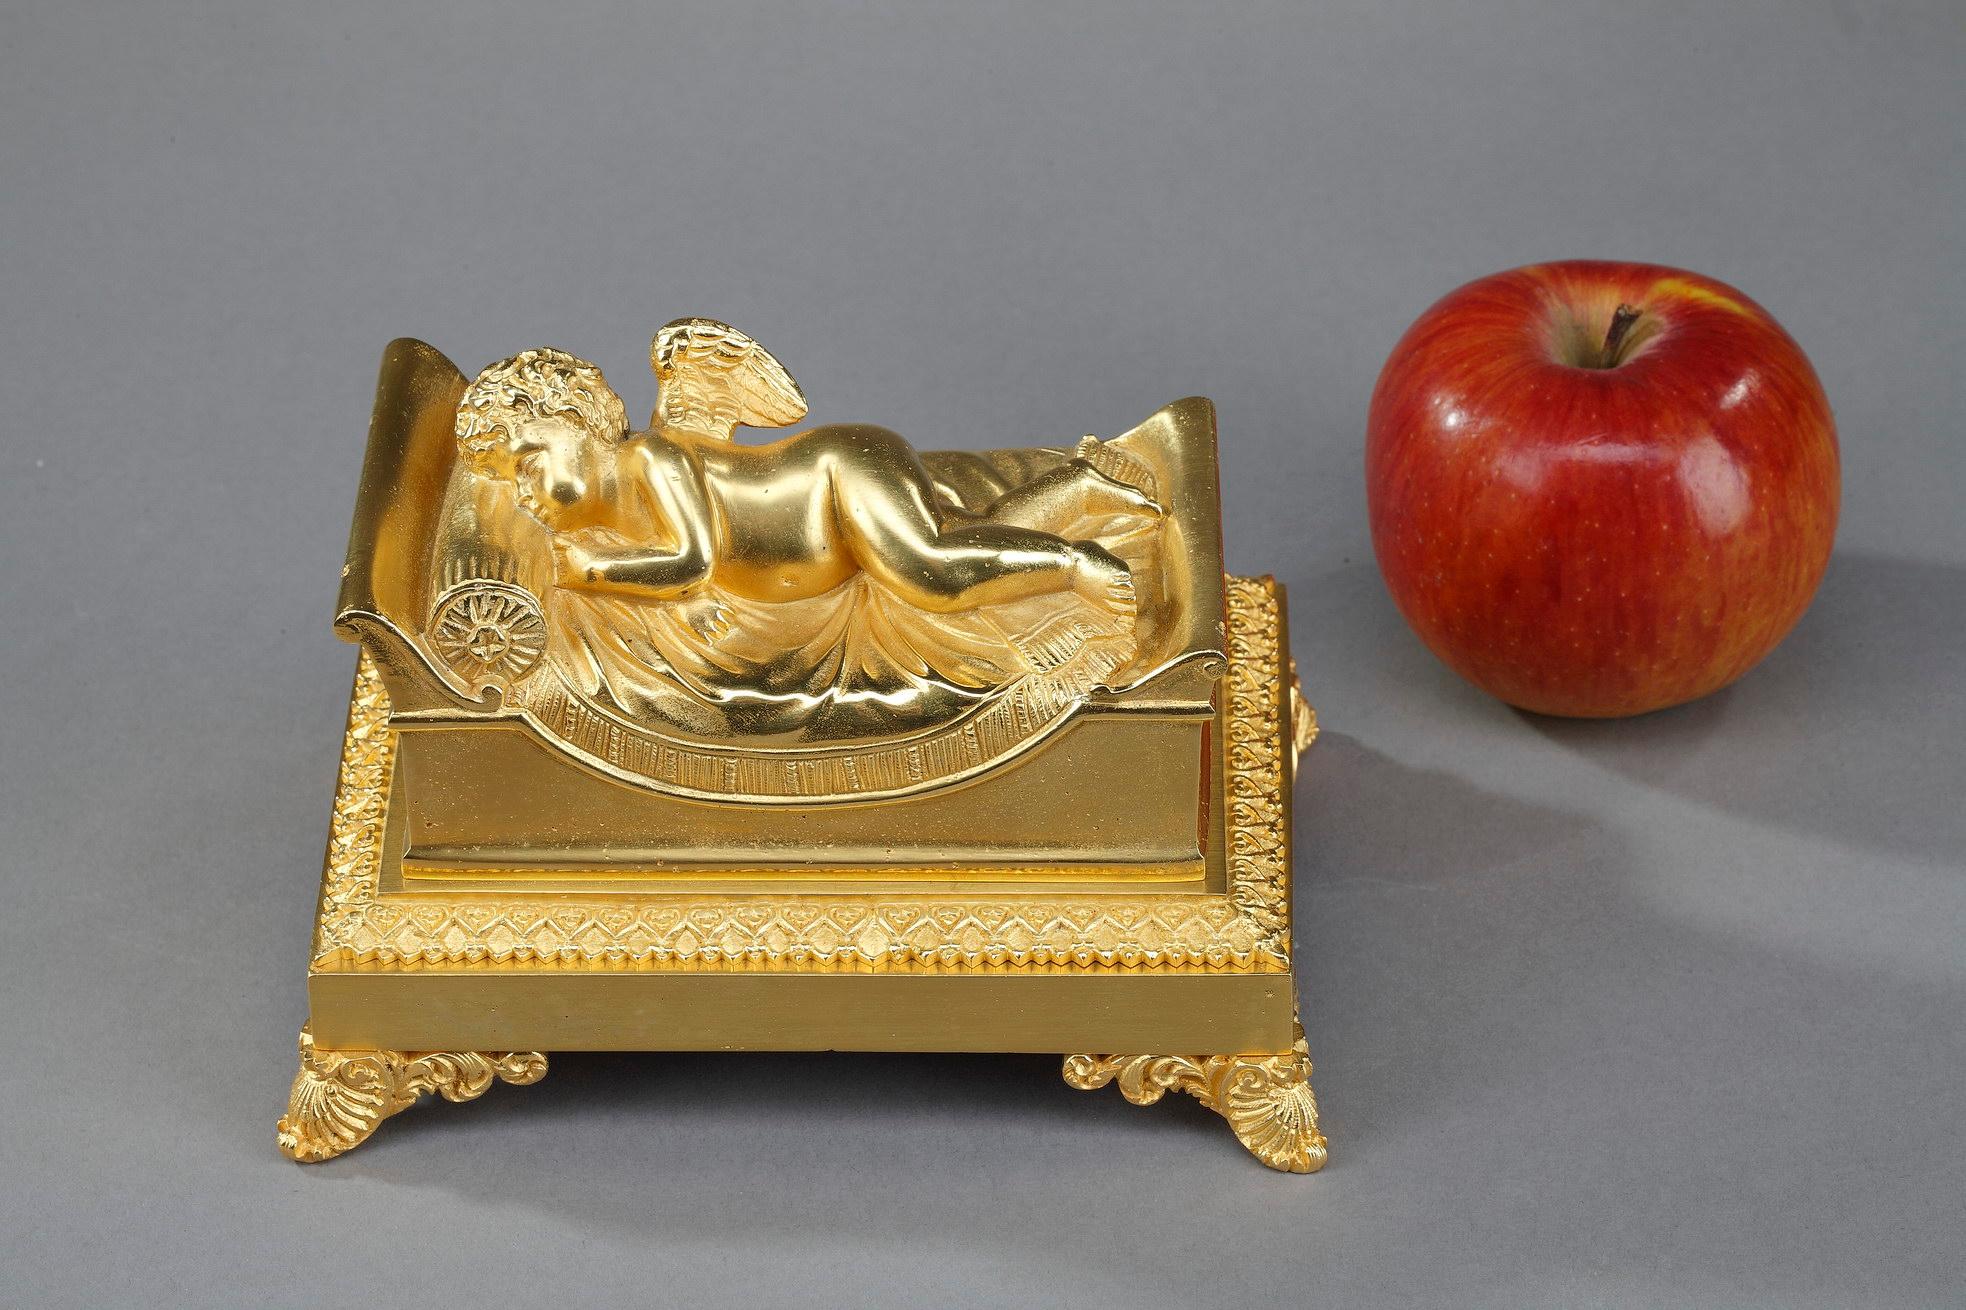 Small bronze inkwell dating from the first part of the 19th century. The lid of the inkwell represents a bed on which a putto is dozing. The whole rests on a rectangular base decorated with a frieze of ovals with four feet in leafy hooves. It is